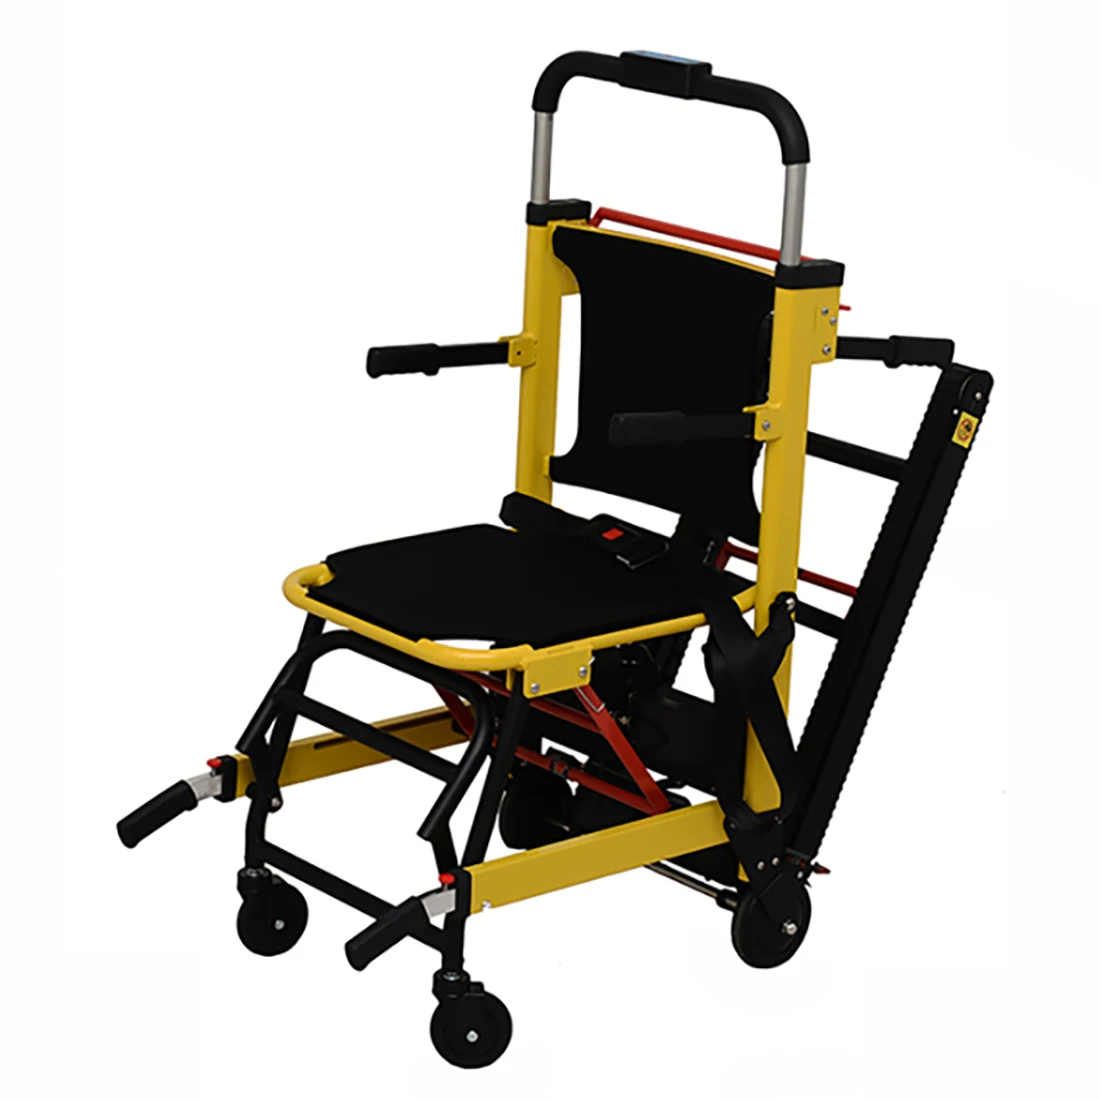 
Medical Emergency Evacuation Stair Chair Stretcher Foldaway Stepping Wheelchair for Patient Move  (62328091635)